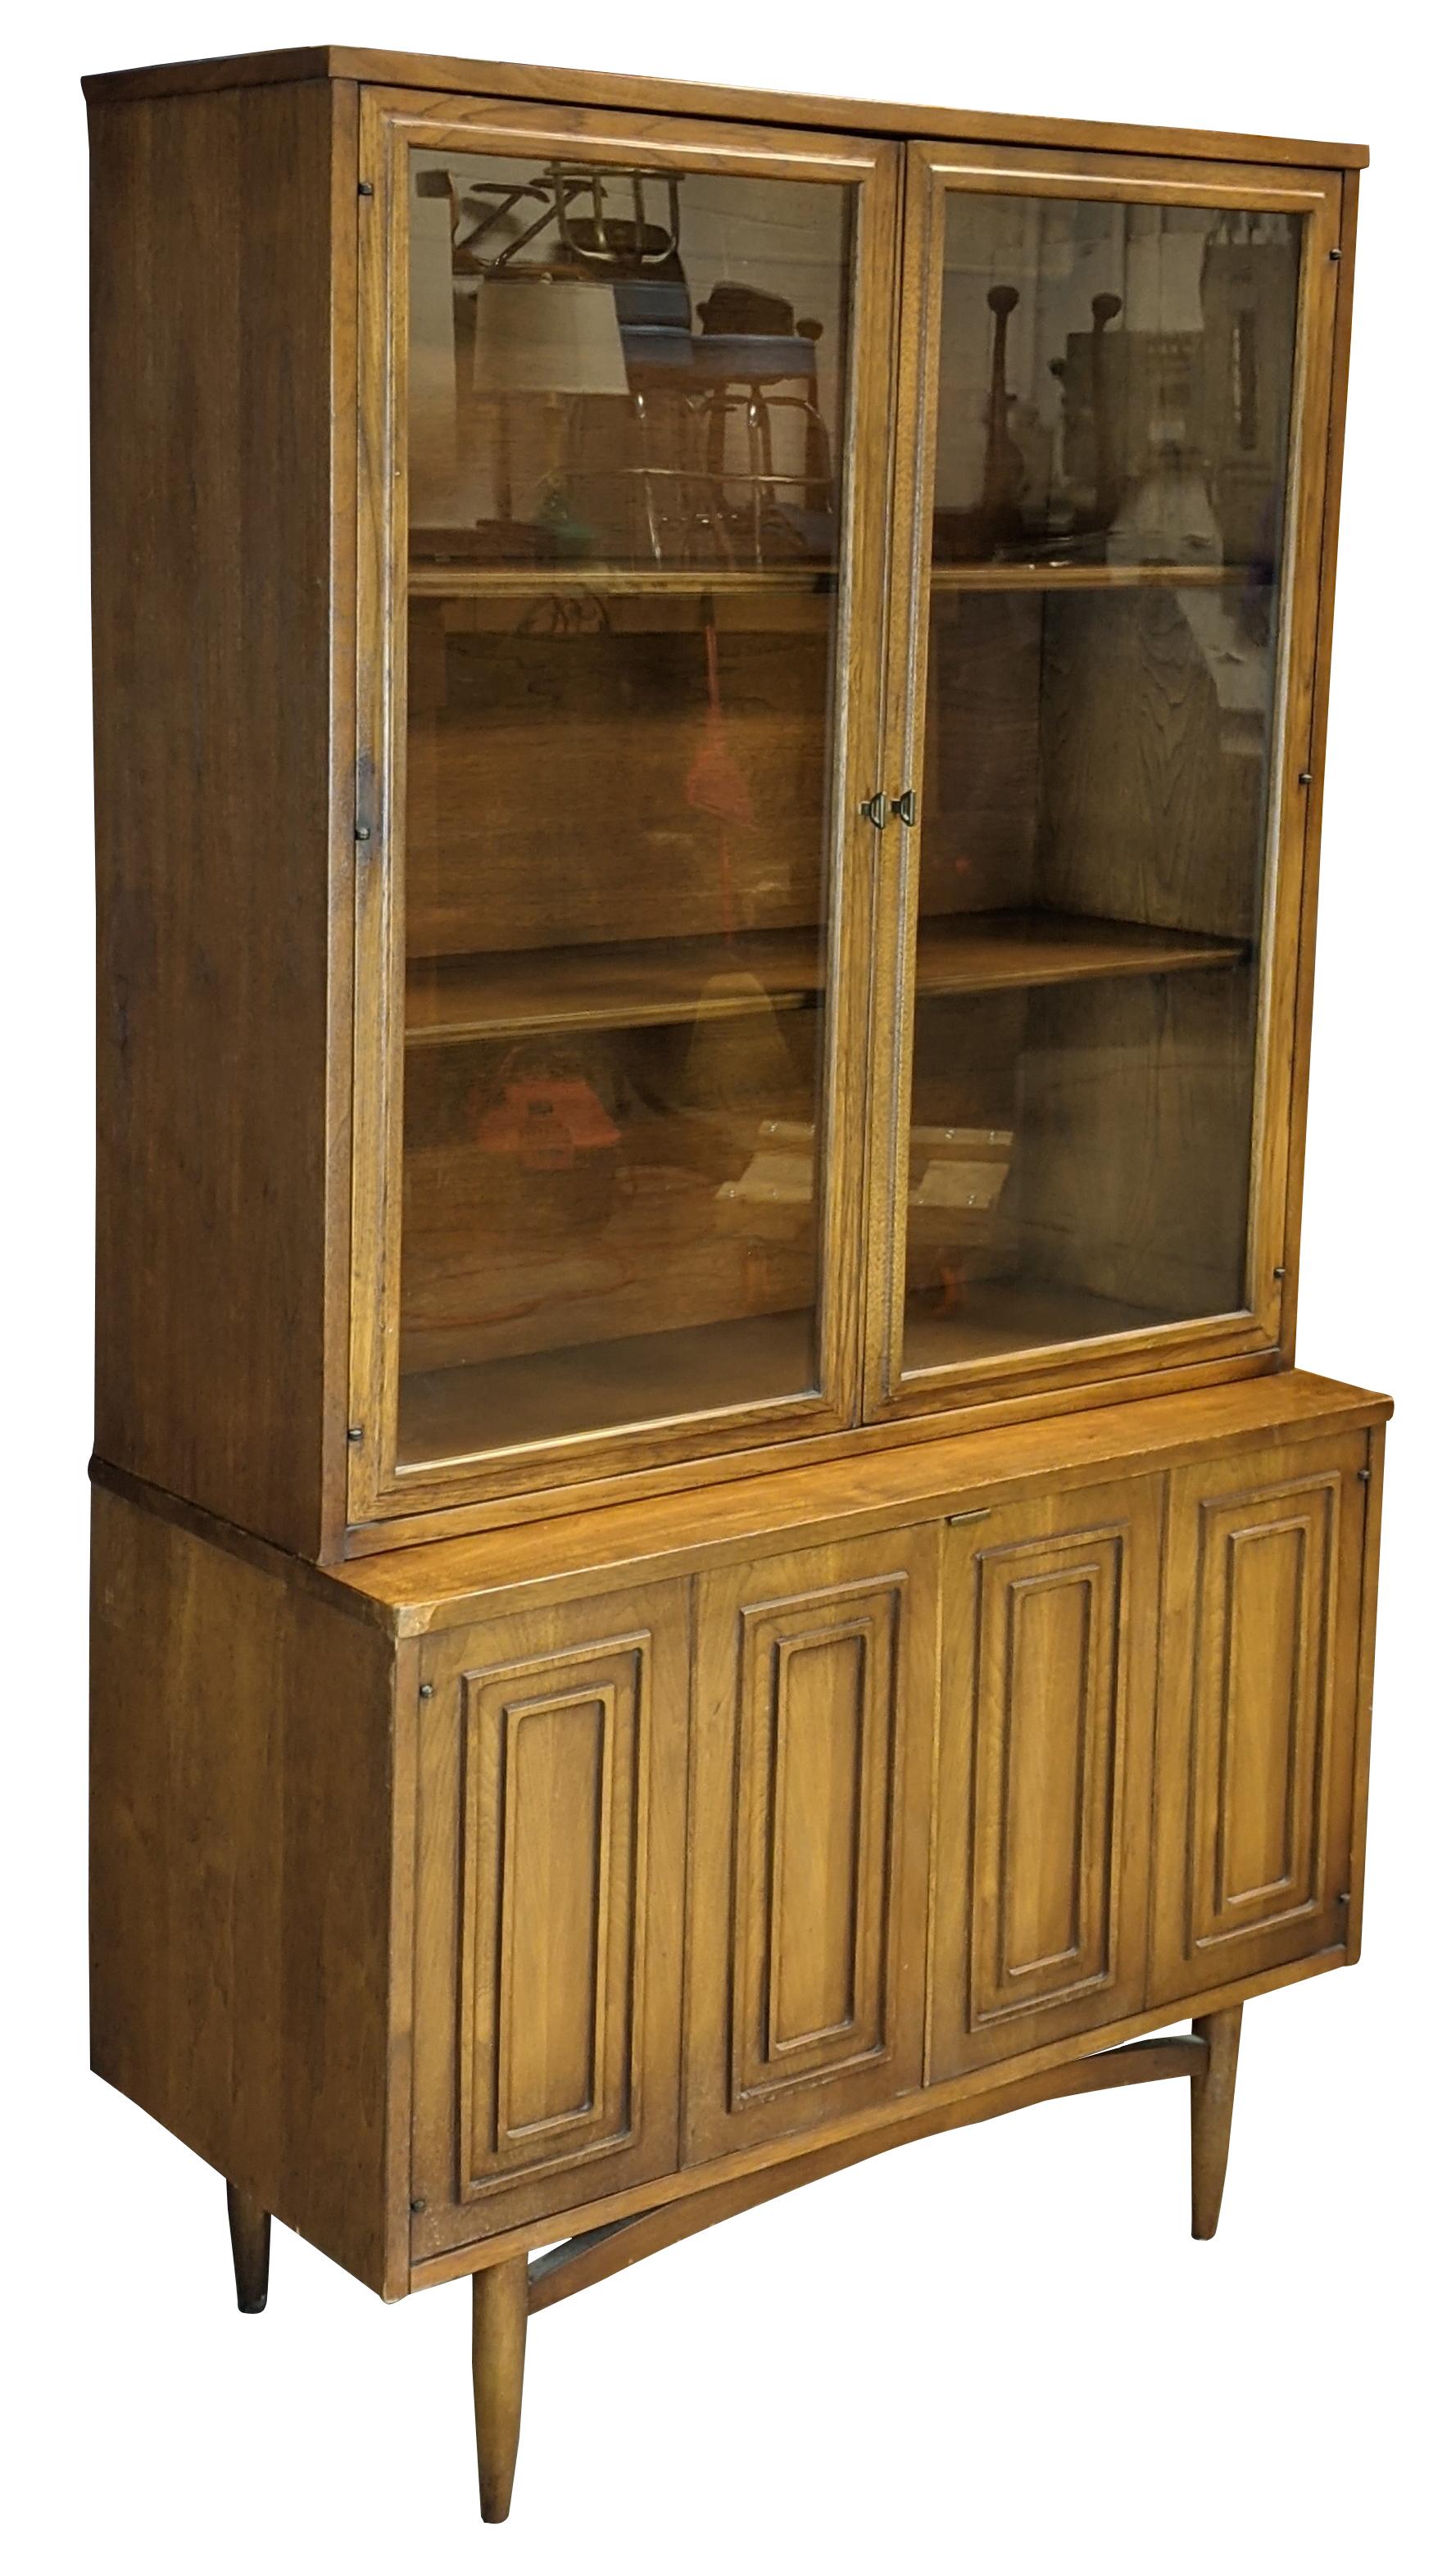 Broyhill Premier Sculptra collection bookcase or china cabinet, circa 1960s. Made of walnut with Mid-Century Modern styling. Tapered legs support a two-door compartment with inner drawer, and two glass doors open to three shelves.

Measures: 17